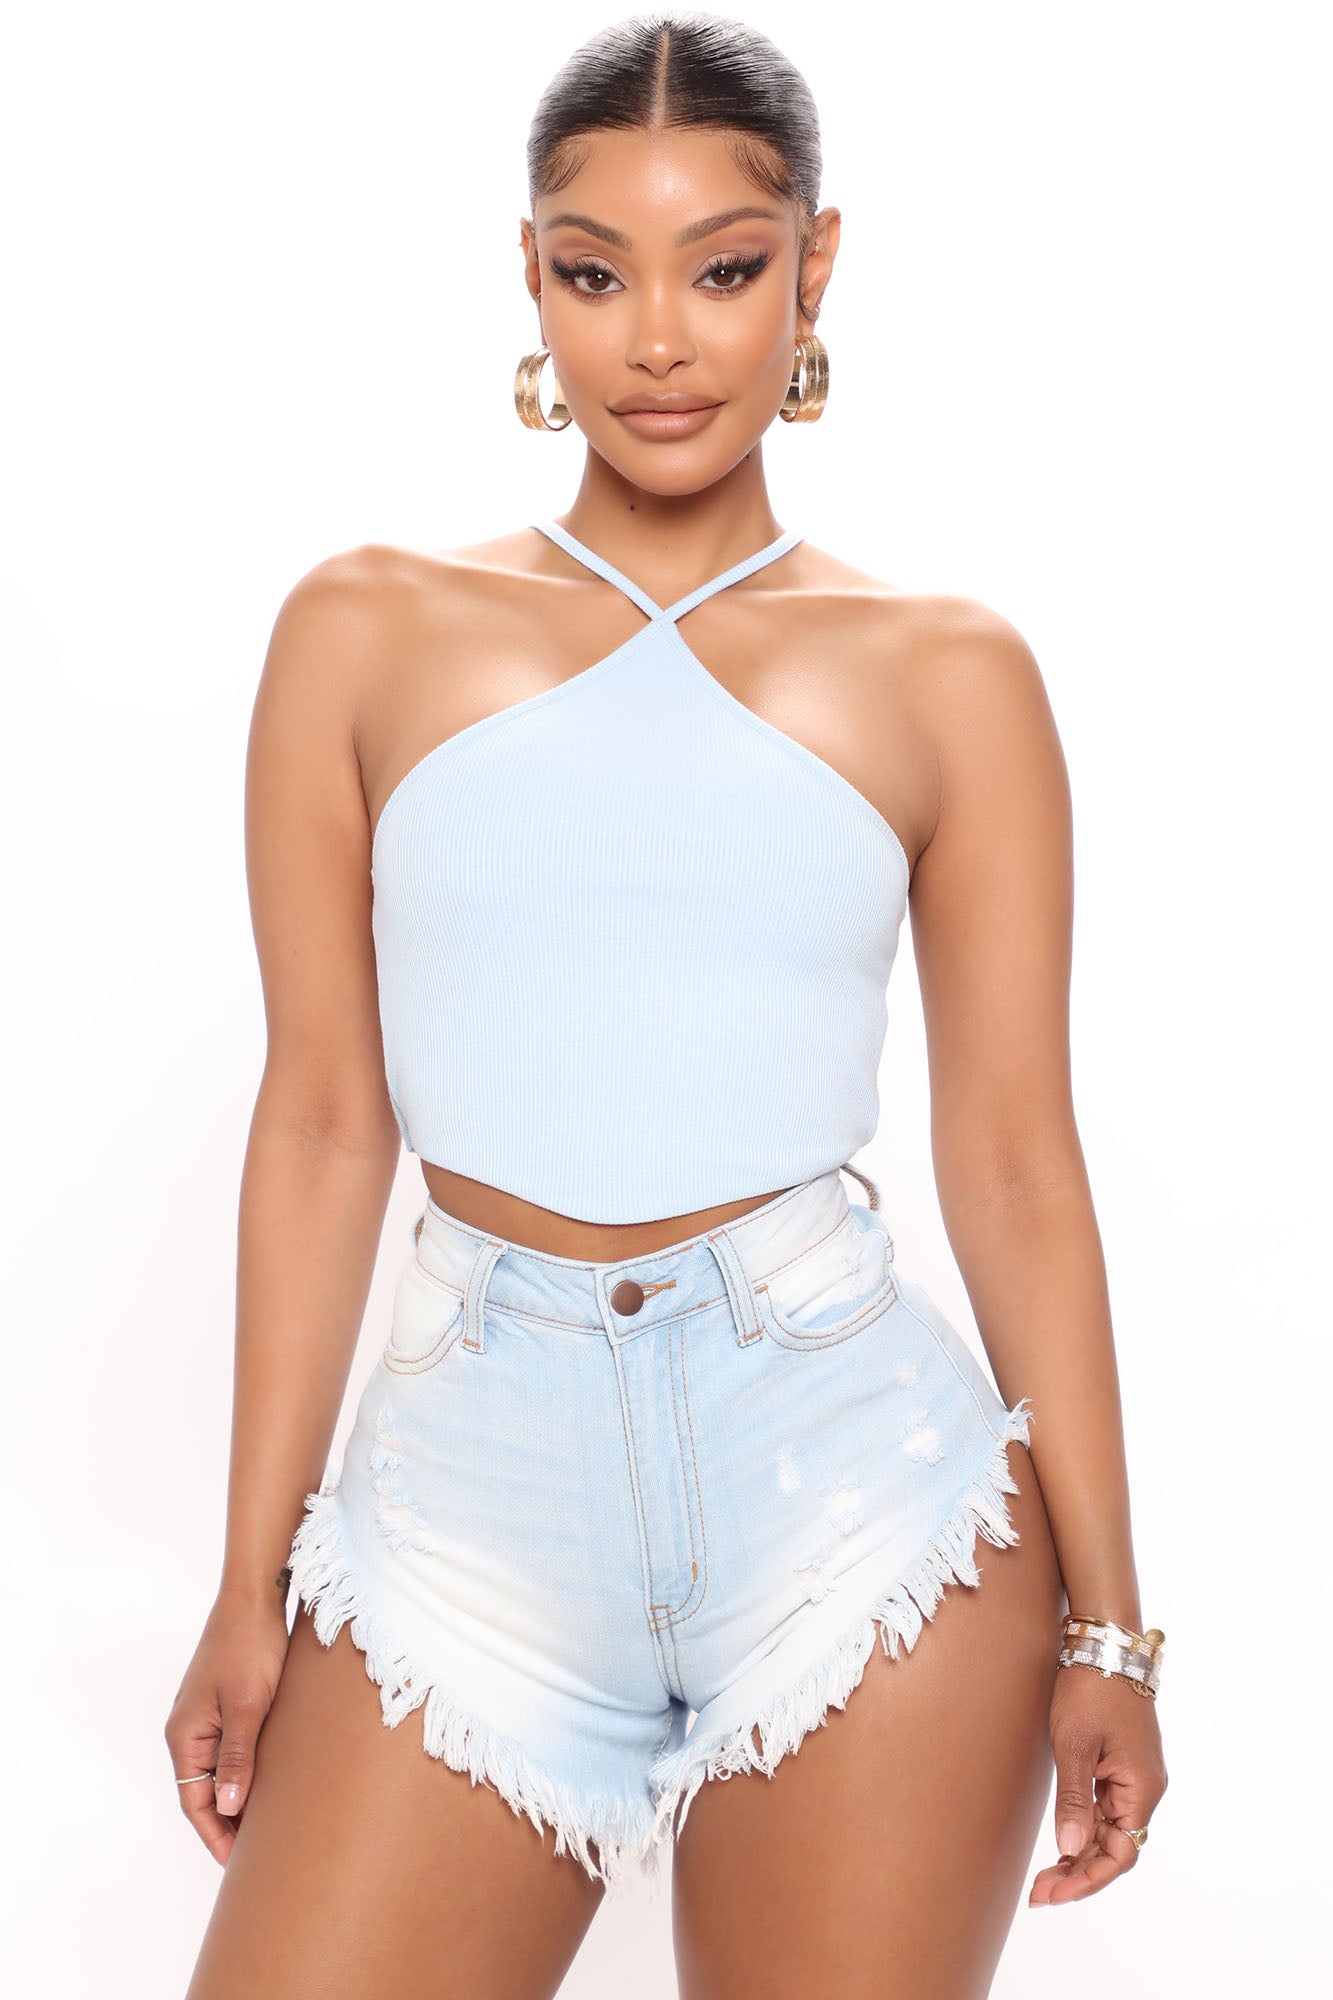 Meant To Be Halter Top ★ Light Wash